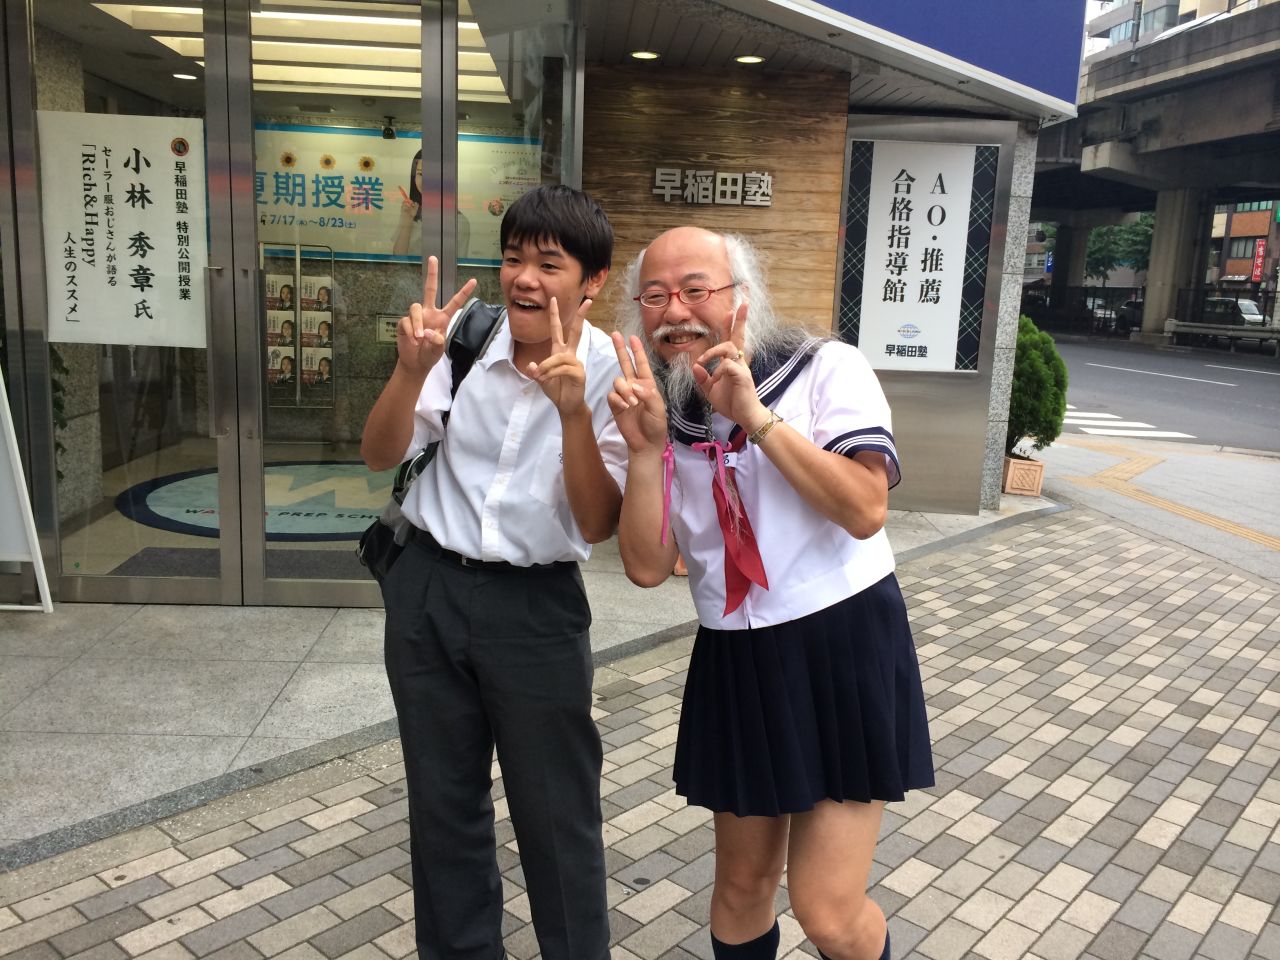 Kobayashi is known online as "Sailor Fuku Ojisan" -- which translates "old guy in a sailor outfit."  